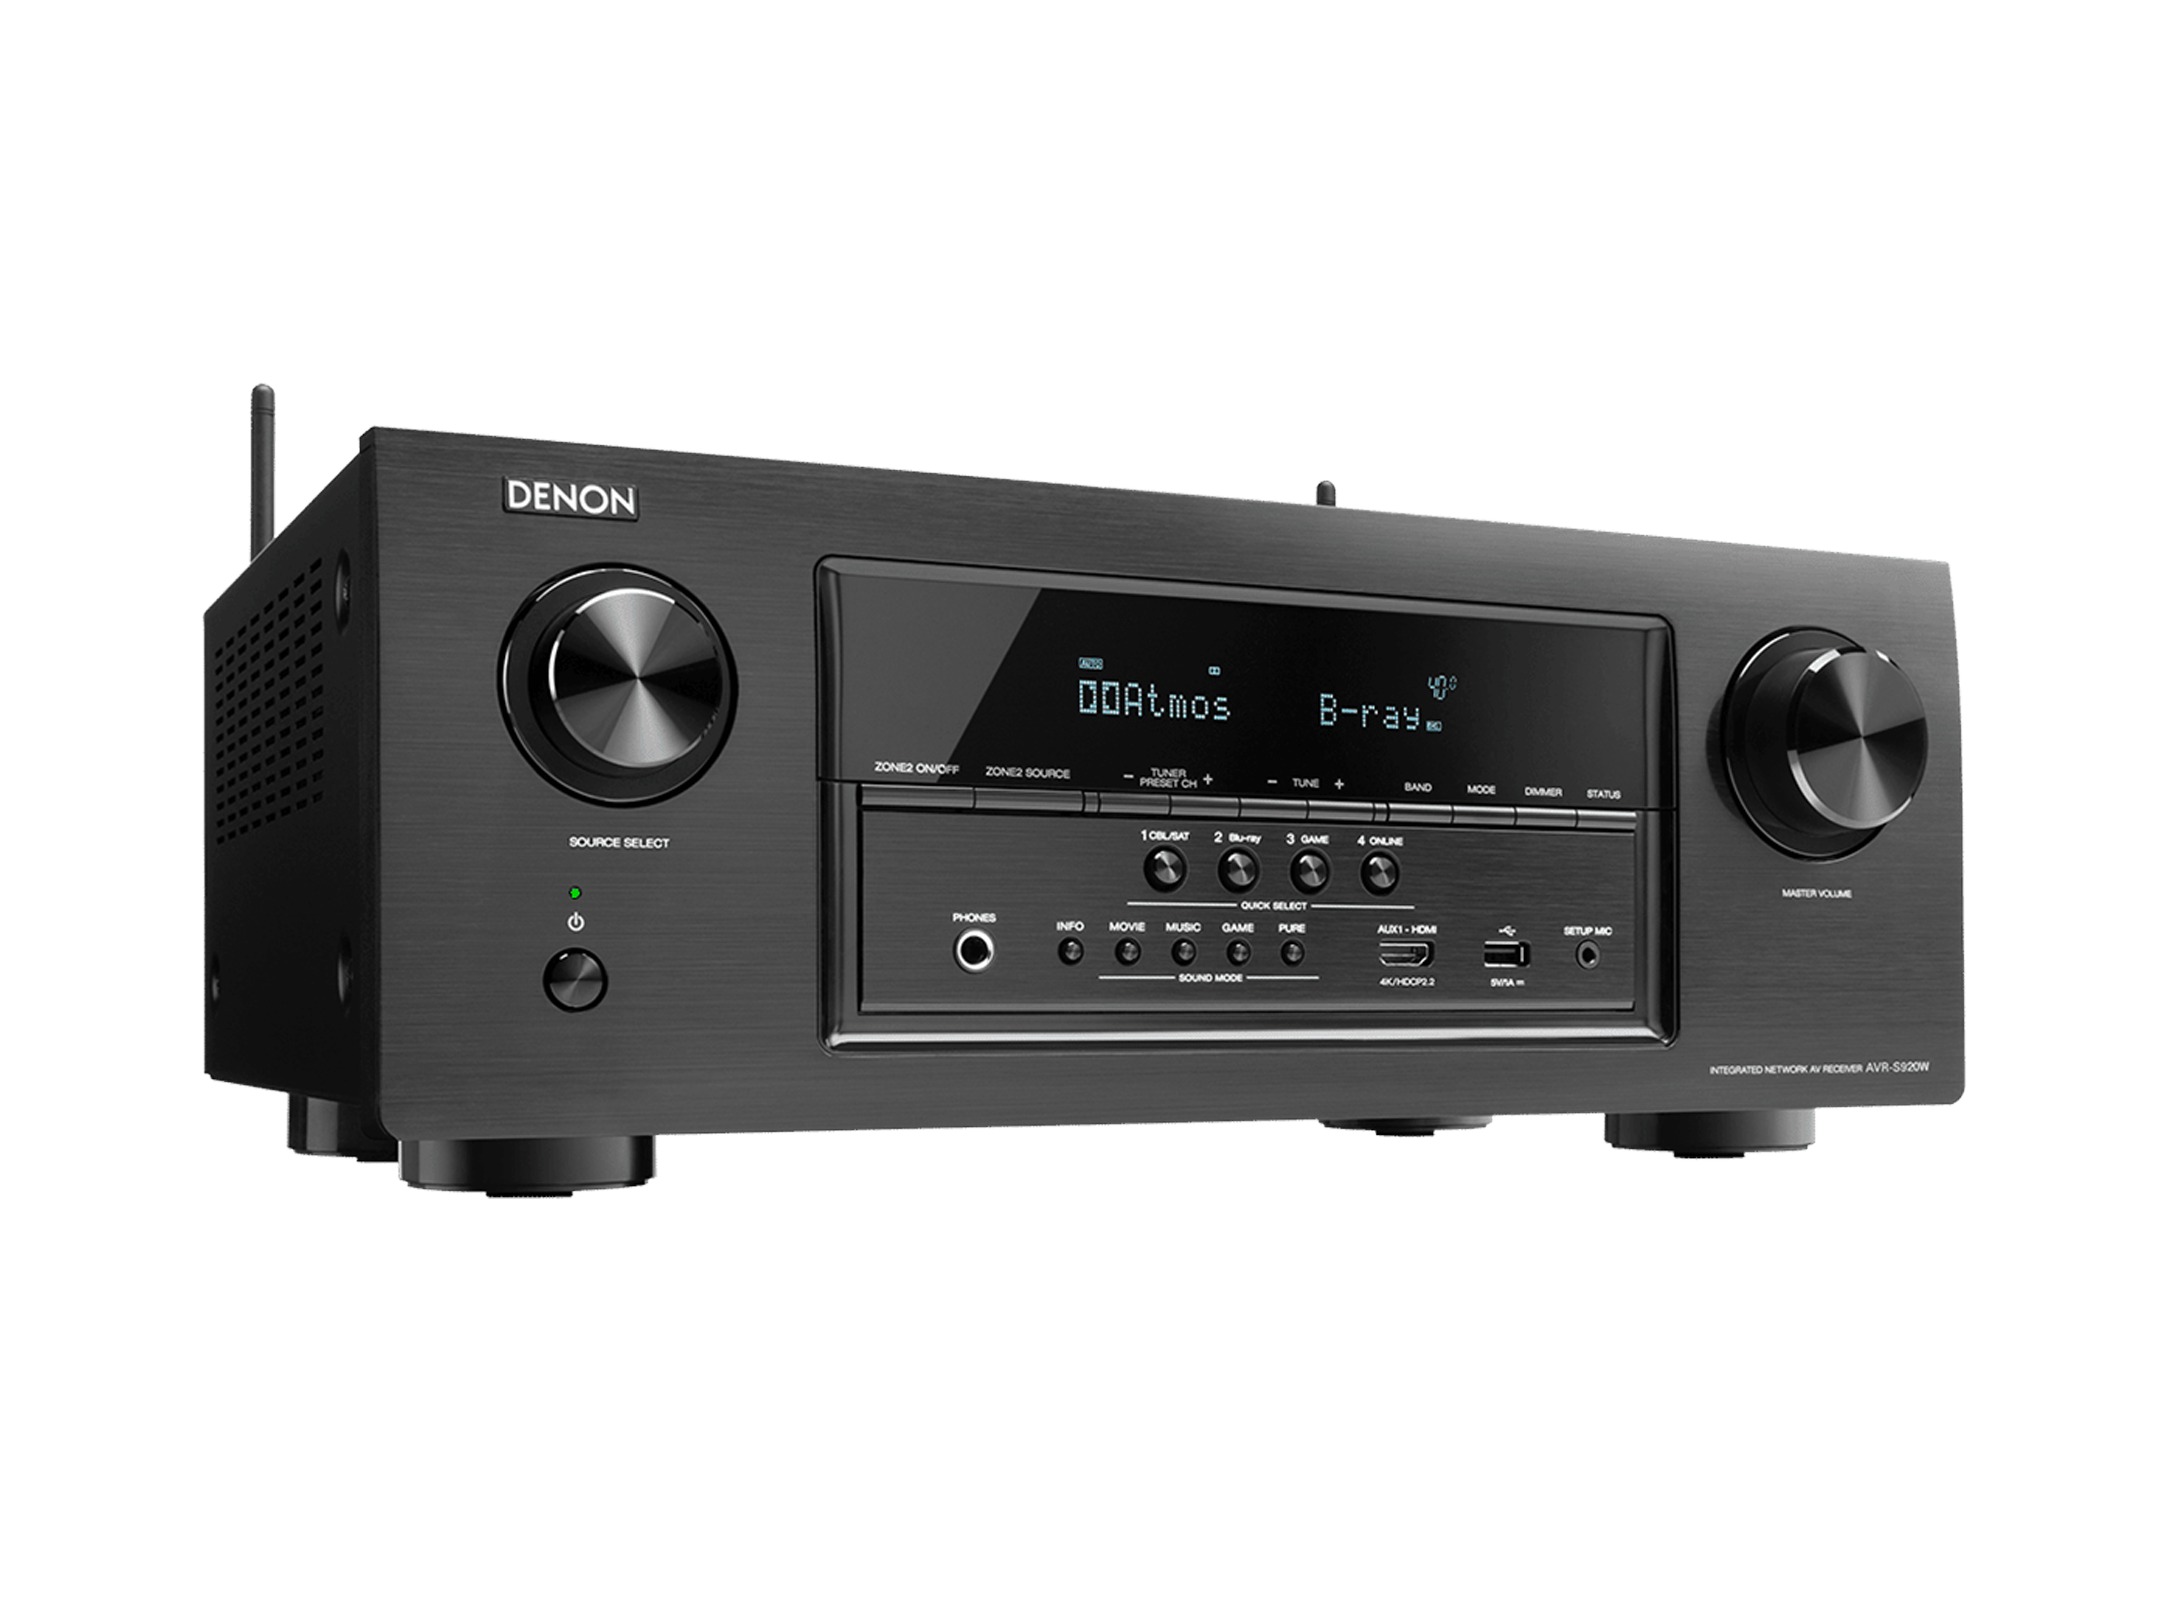 How To Hook Up Turntable To Denon Avr-S920W Receiver With Built In Preamp